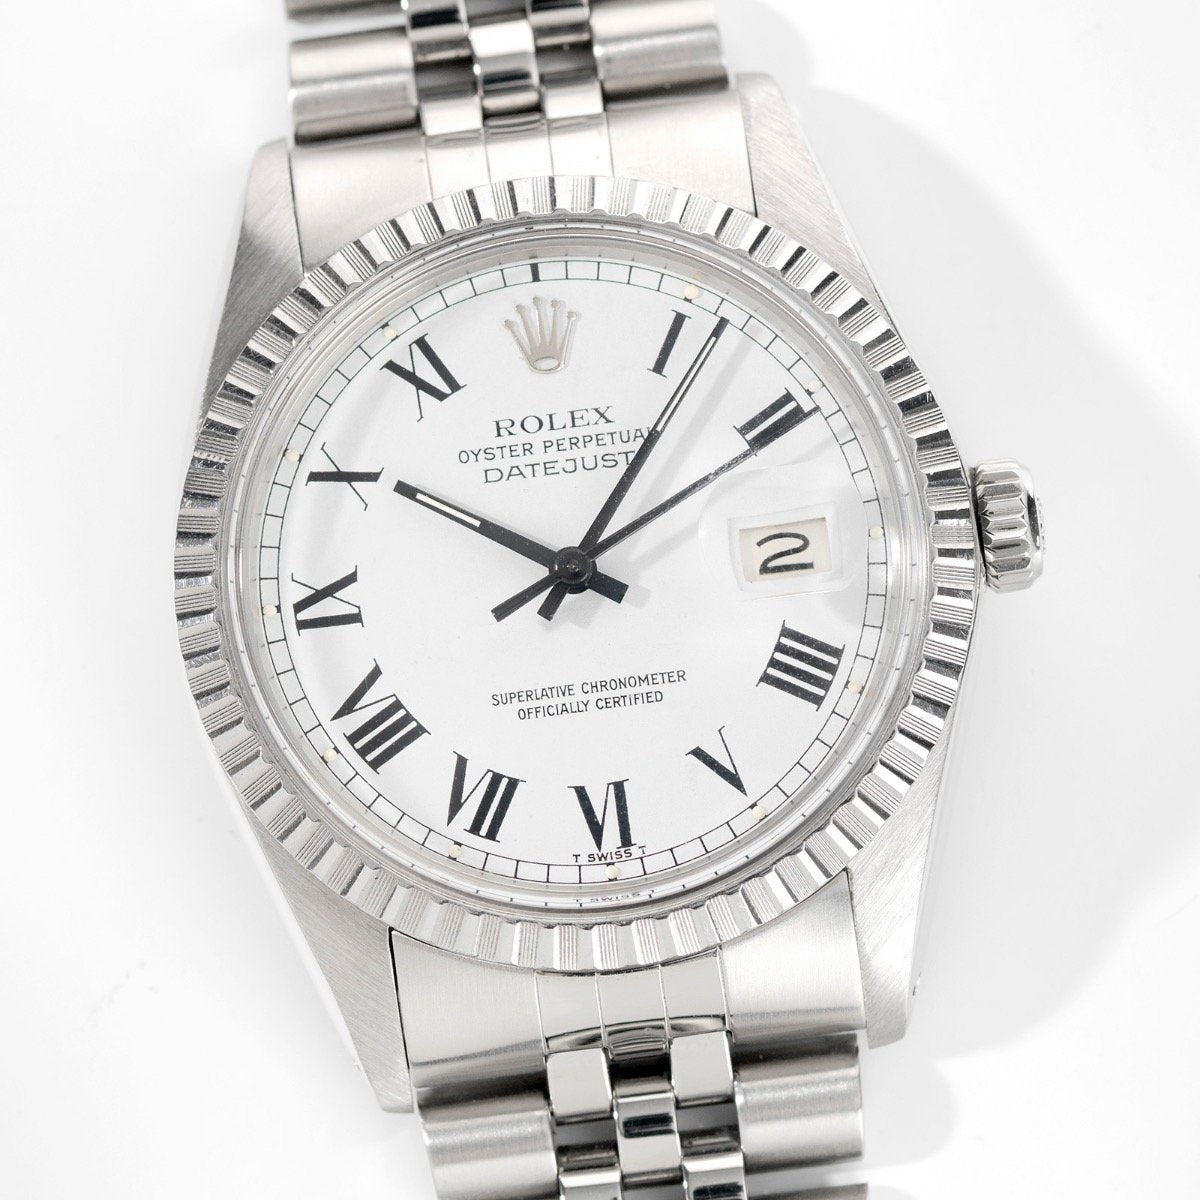 Rolex Datejust Reference 16030 Buckley Dial